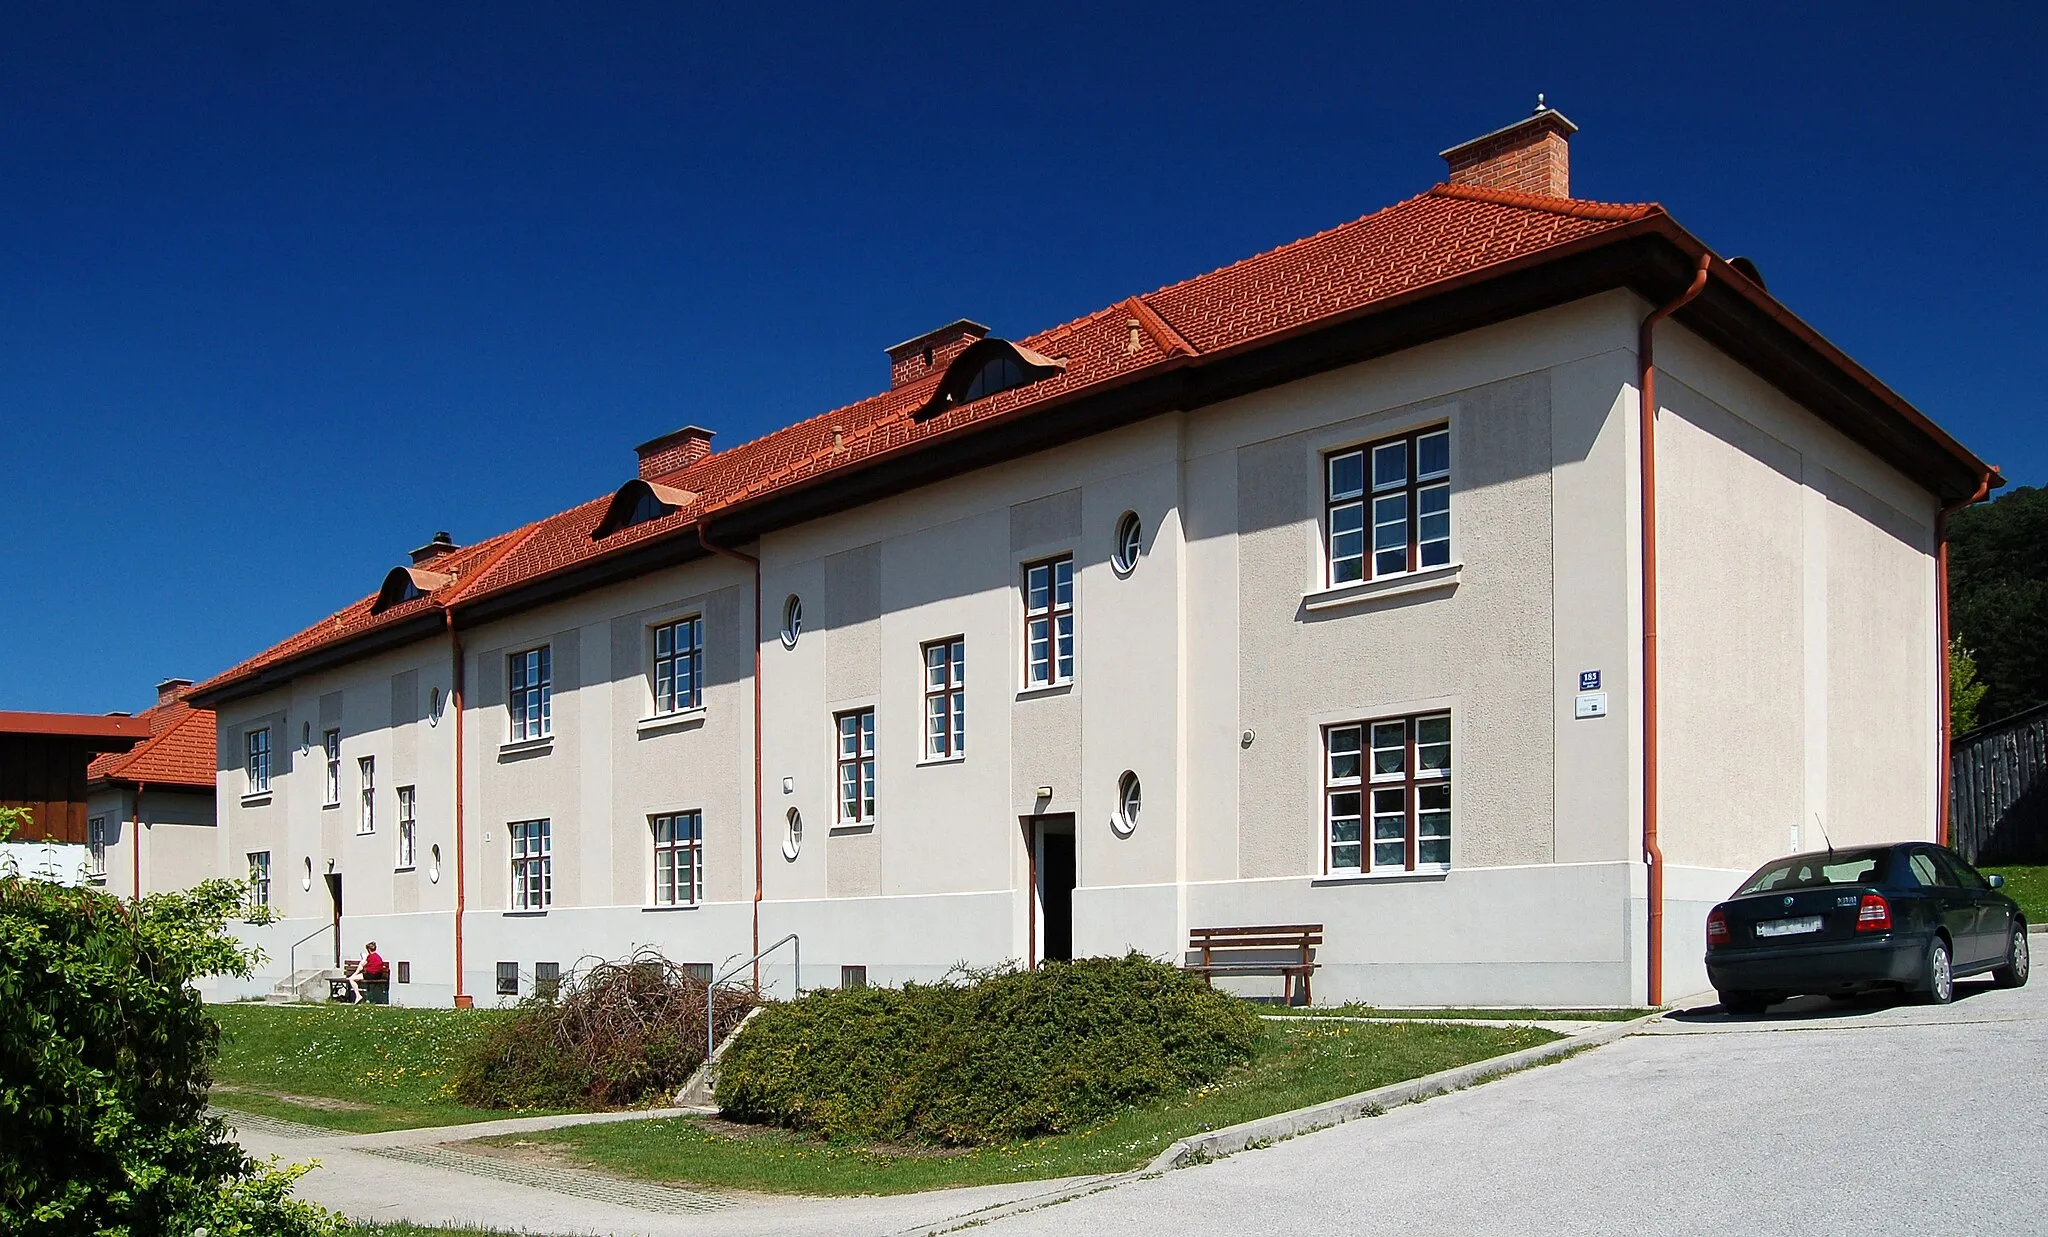 Photo showing: The settlement Neue Kolonie was built in 1919 for the miners of the Grillenberg brown coal mine. It is located in Veitsau in the municipality of Berndorf, Lower Austria. It is a cultural heritage monument now.